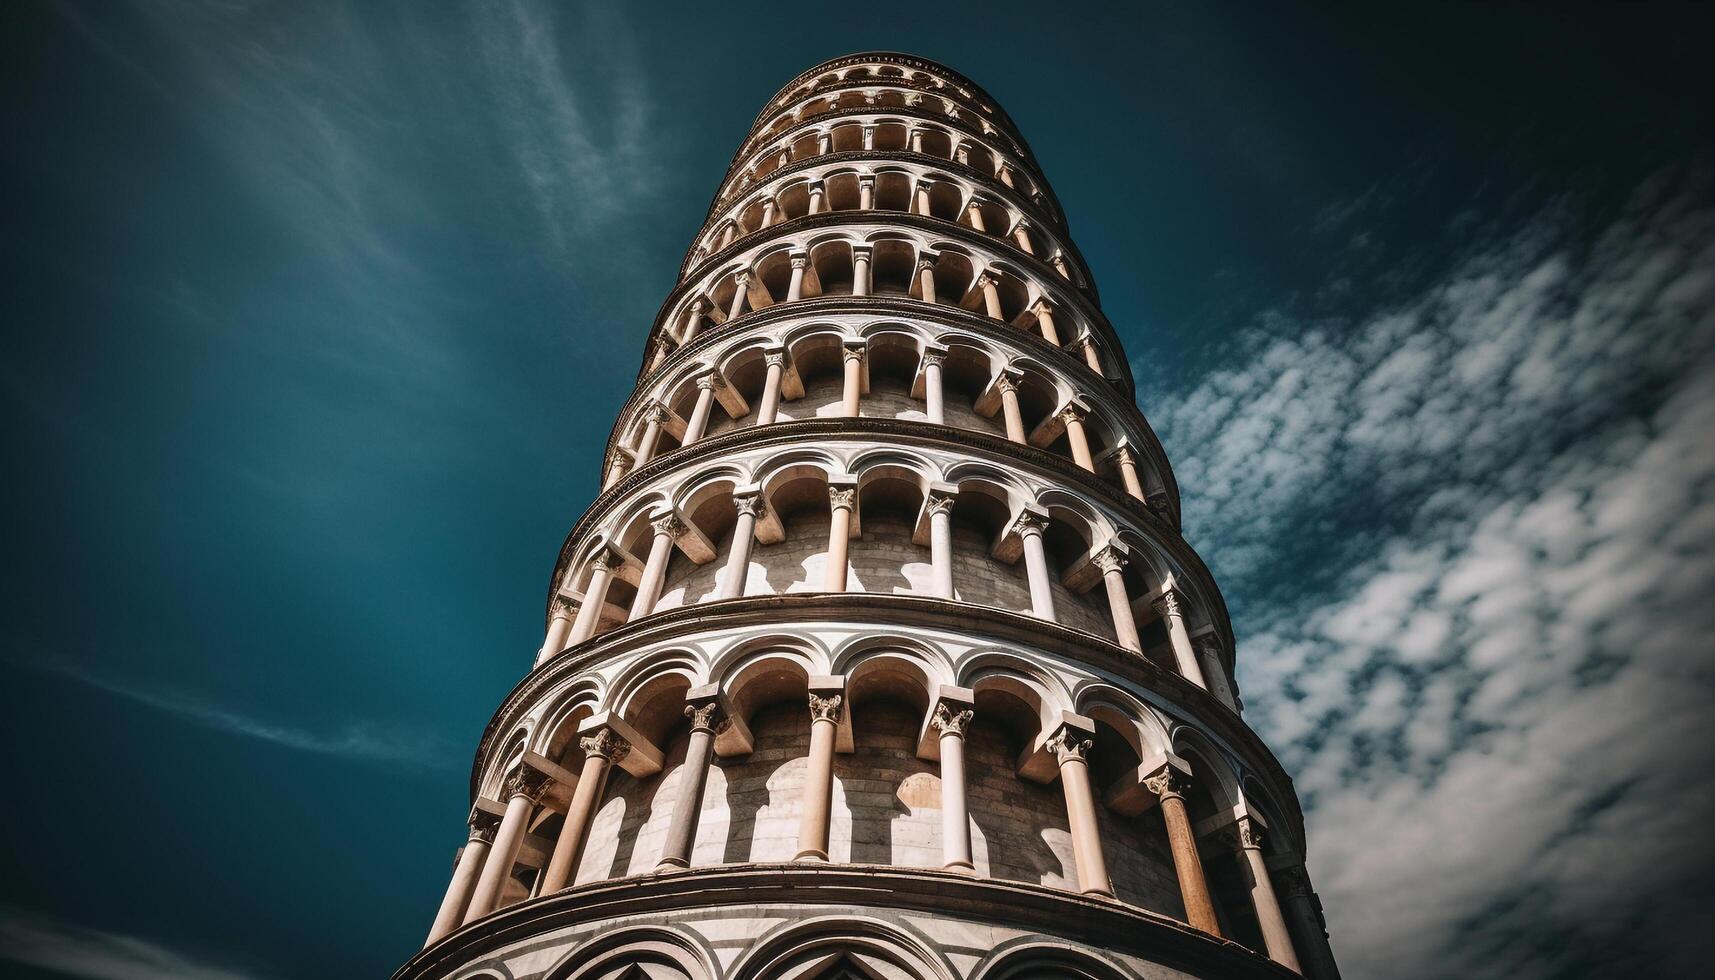 Leaning basilica, ancient miracle, Gothic architecture, Italian culture, national landmark generated by AI photo